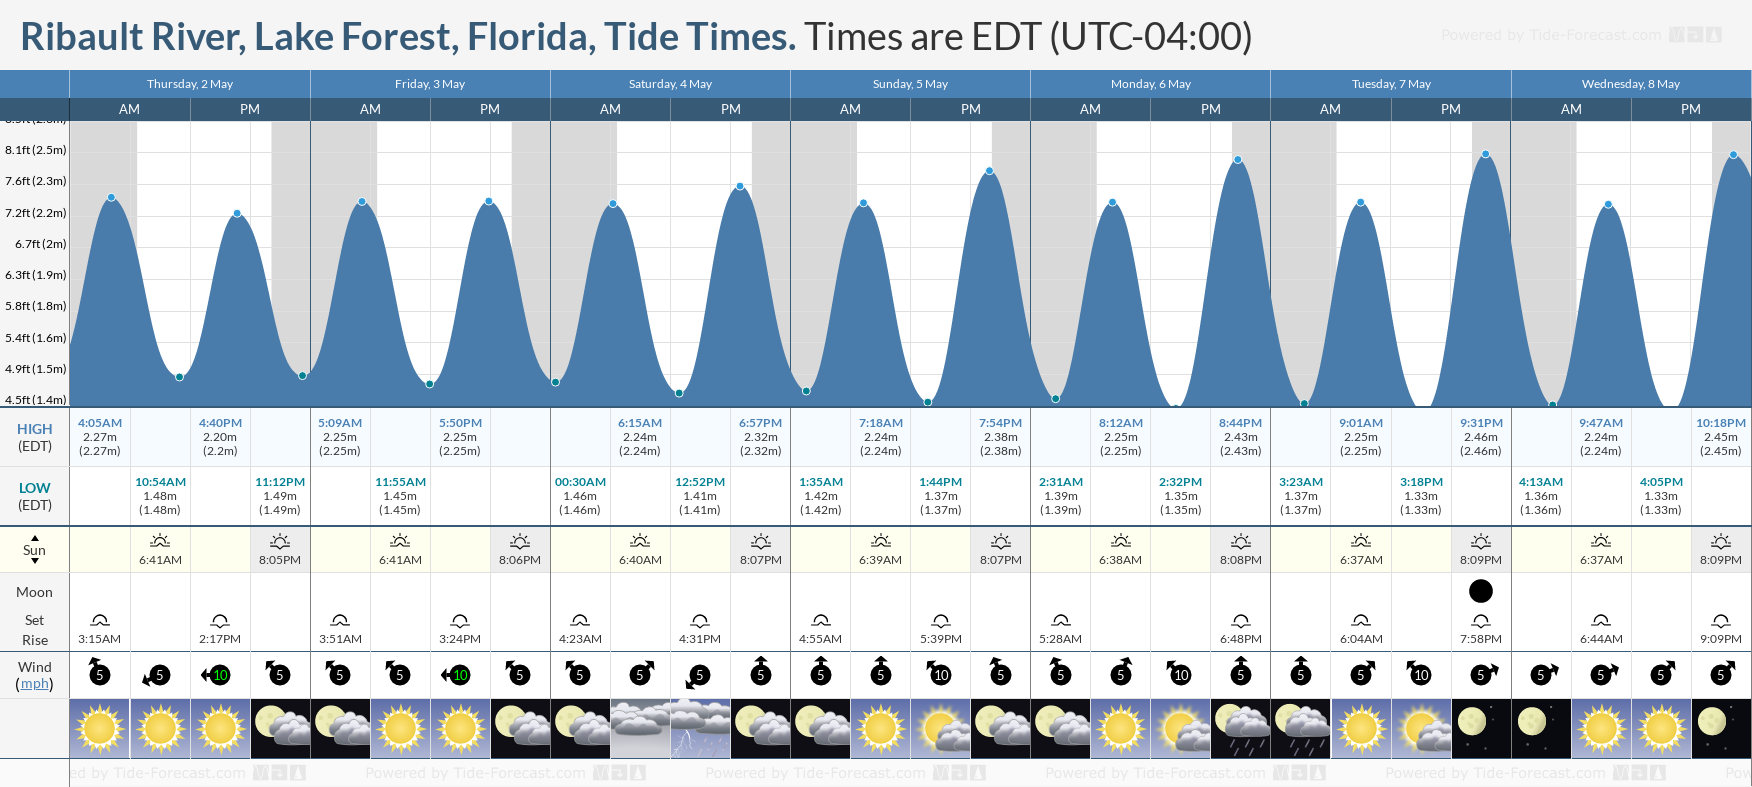 Ribault River, Lake Forest, Florida Tide Chart including high and low tide tide times for the next 7 days